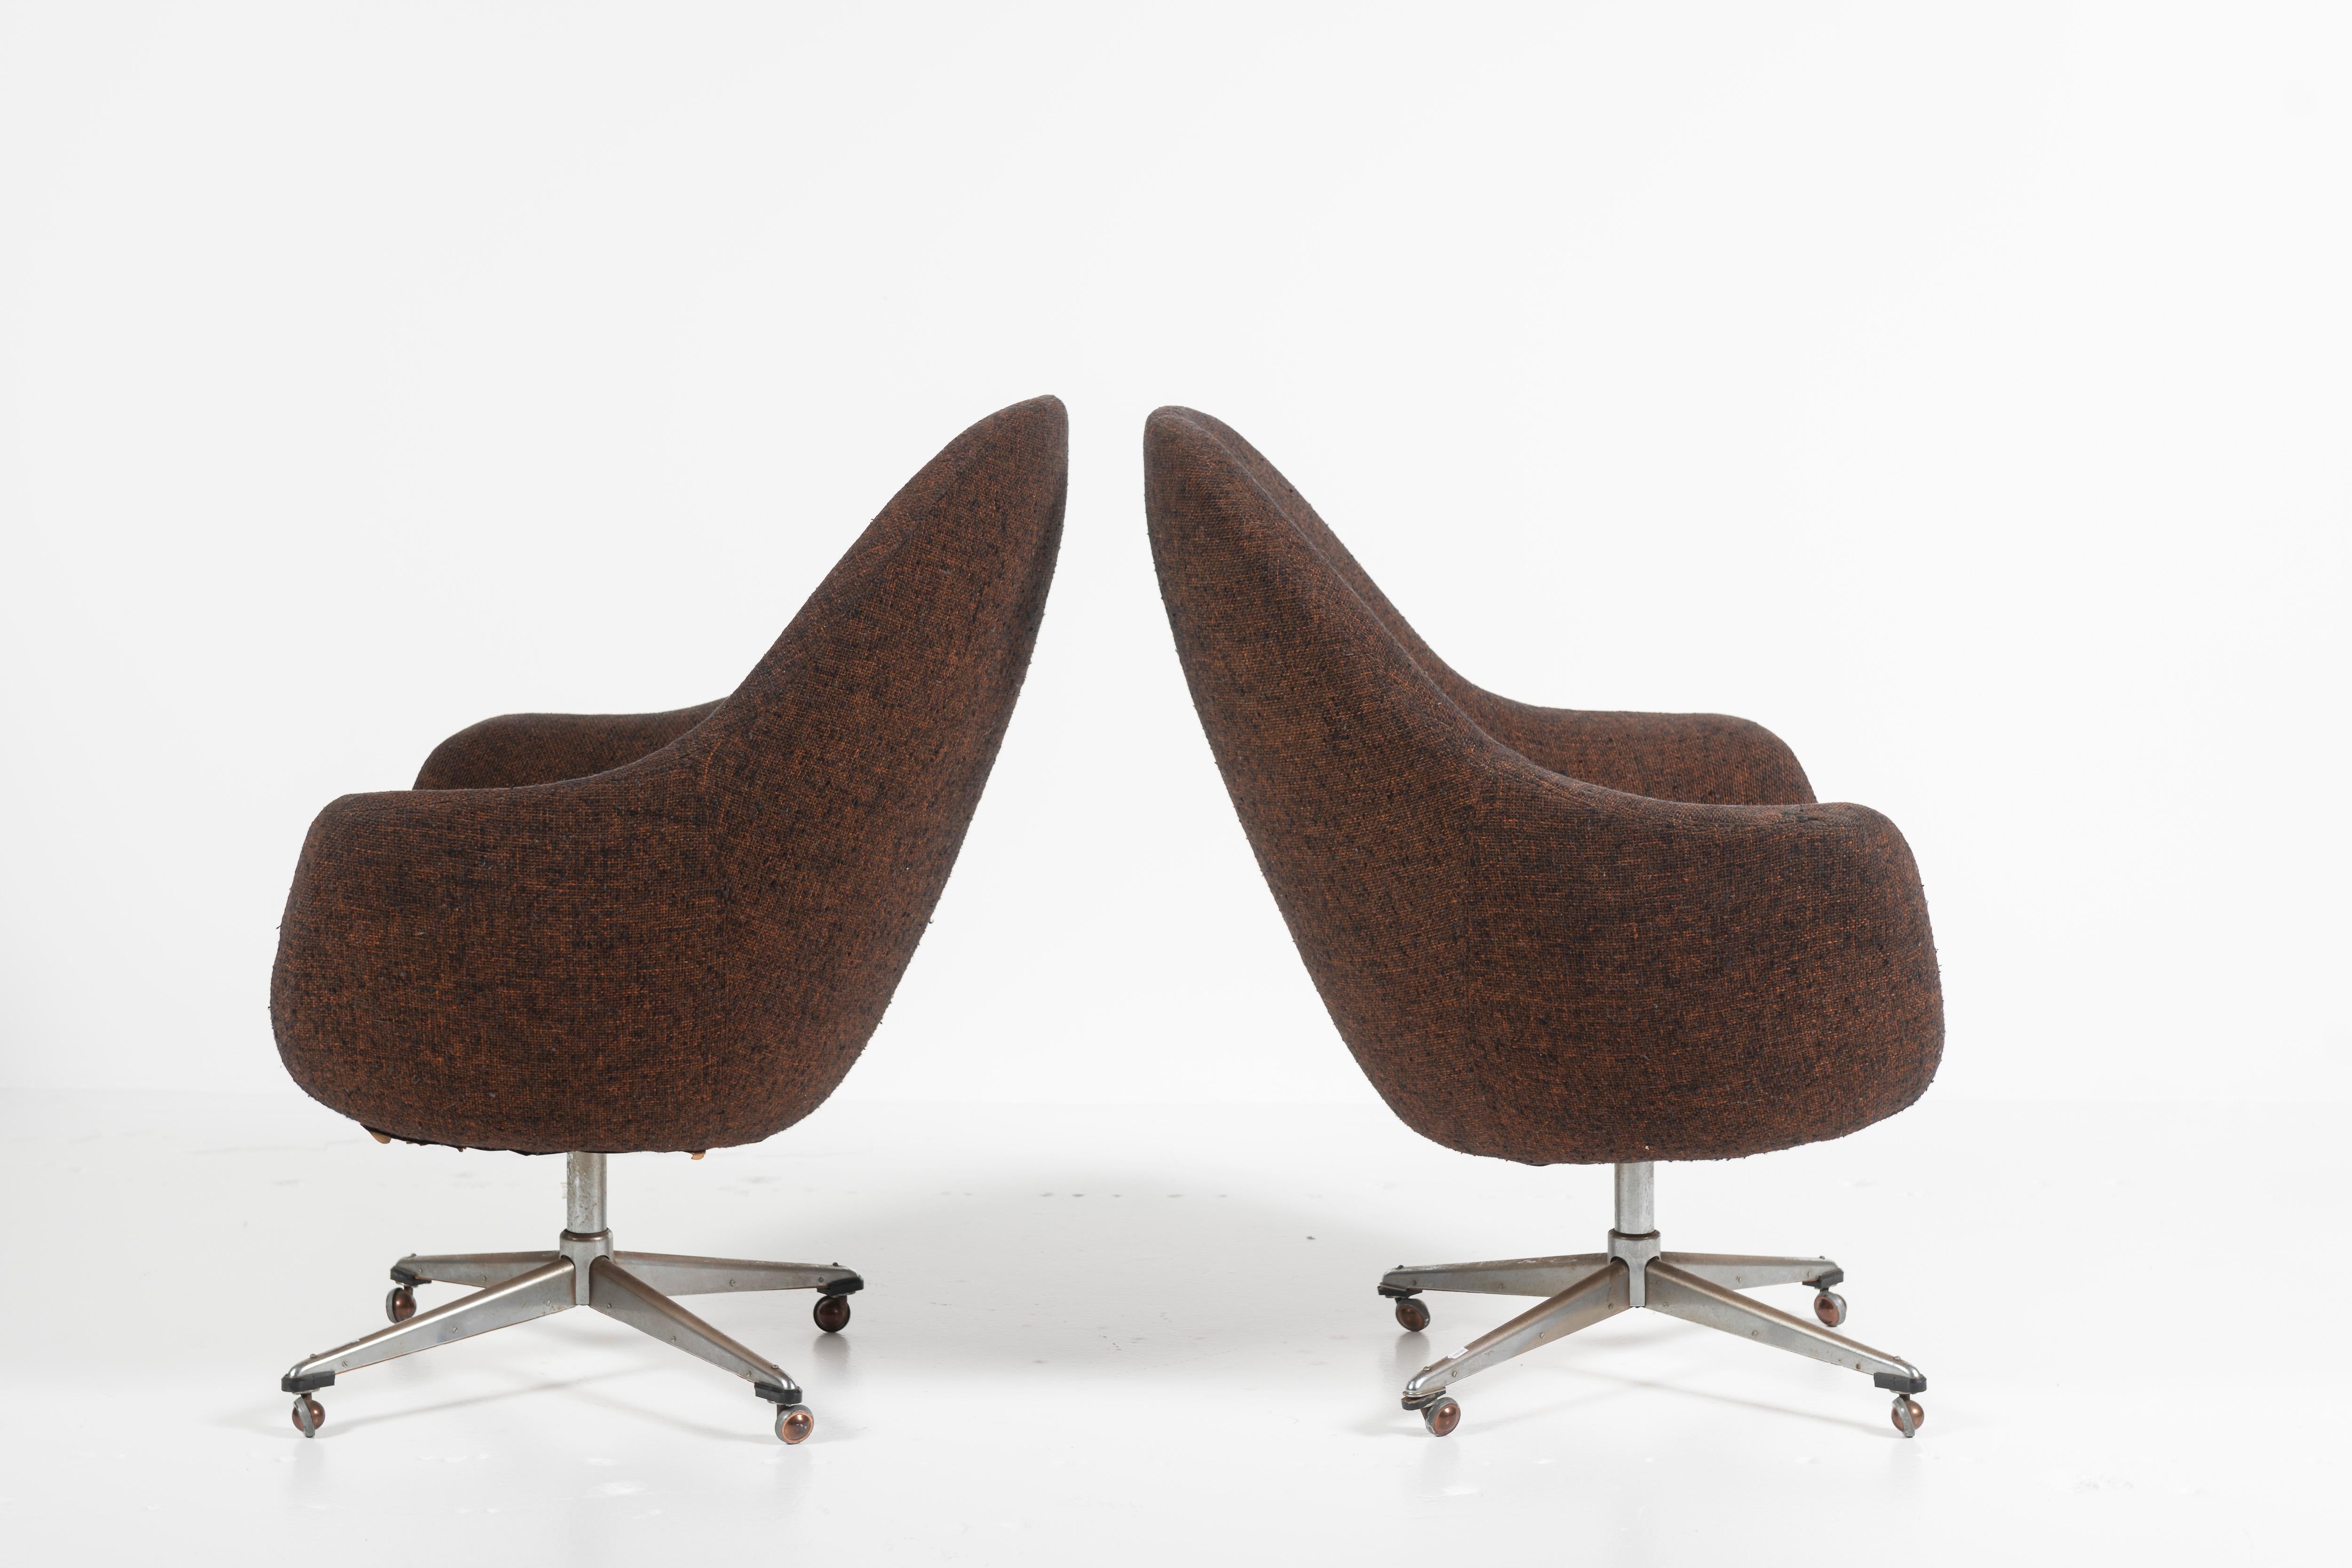 Swedish Pair of Mid-Century Modern Wool Overman Swivel Chairs, with Casters, Sweden 1960 For Sale